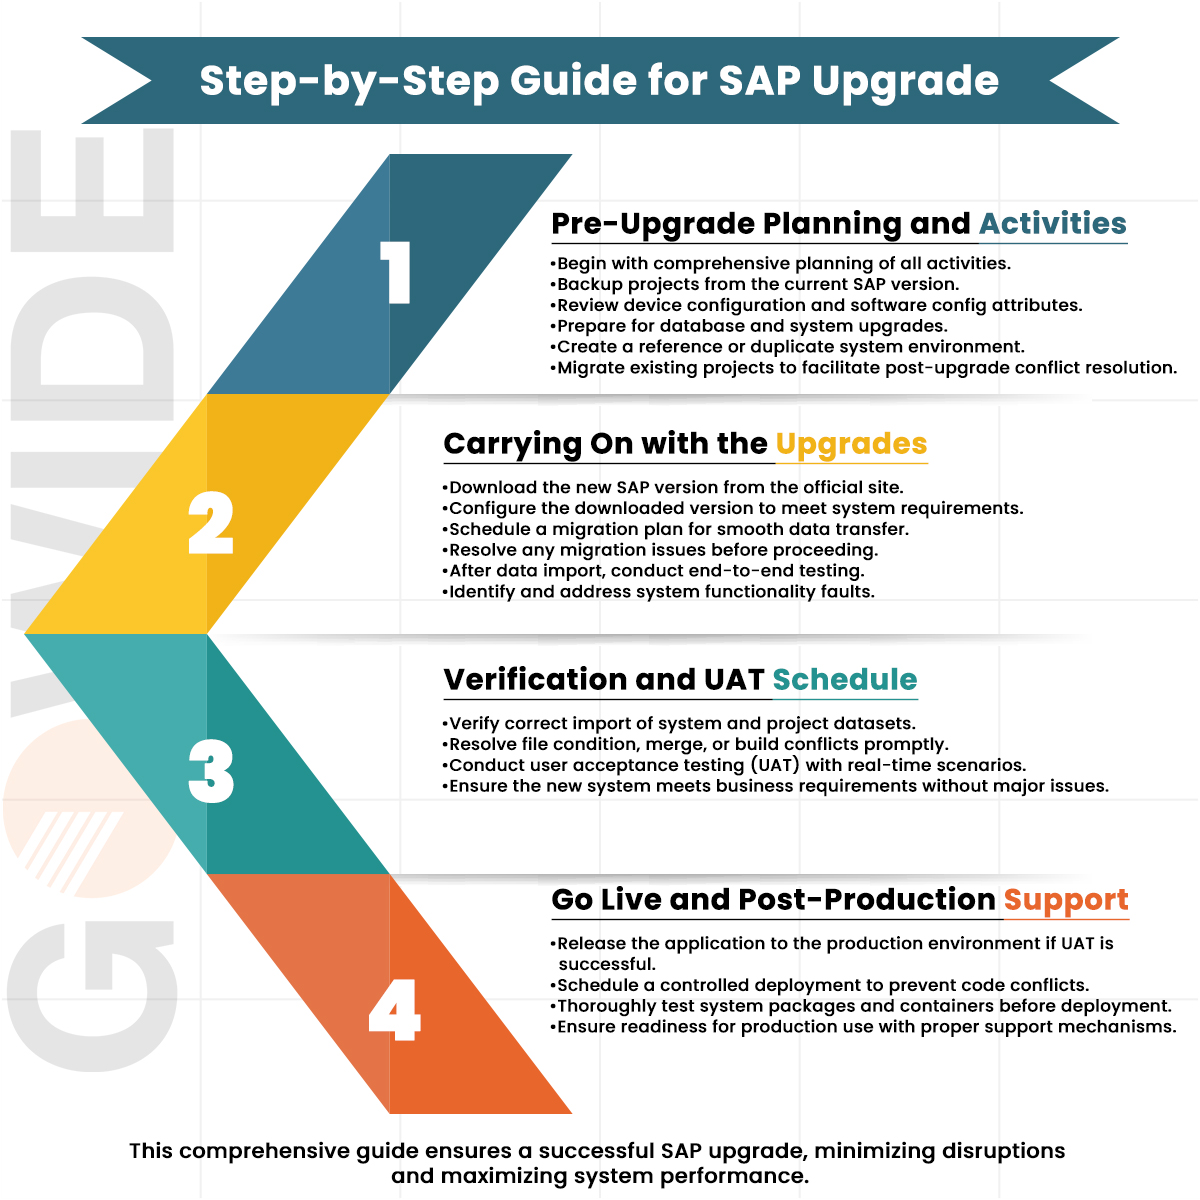 Step-by-Step Guide for SAP Upgrade infographic